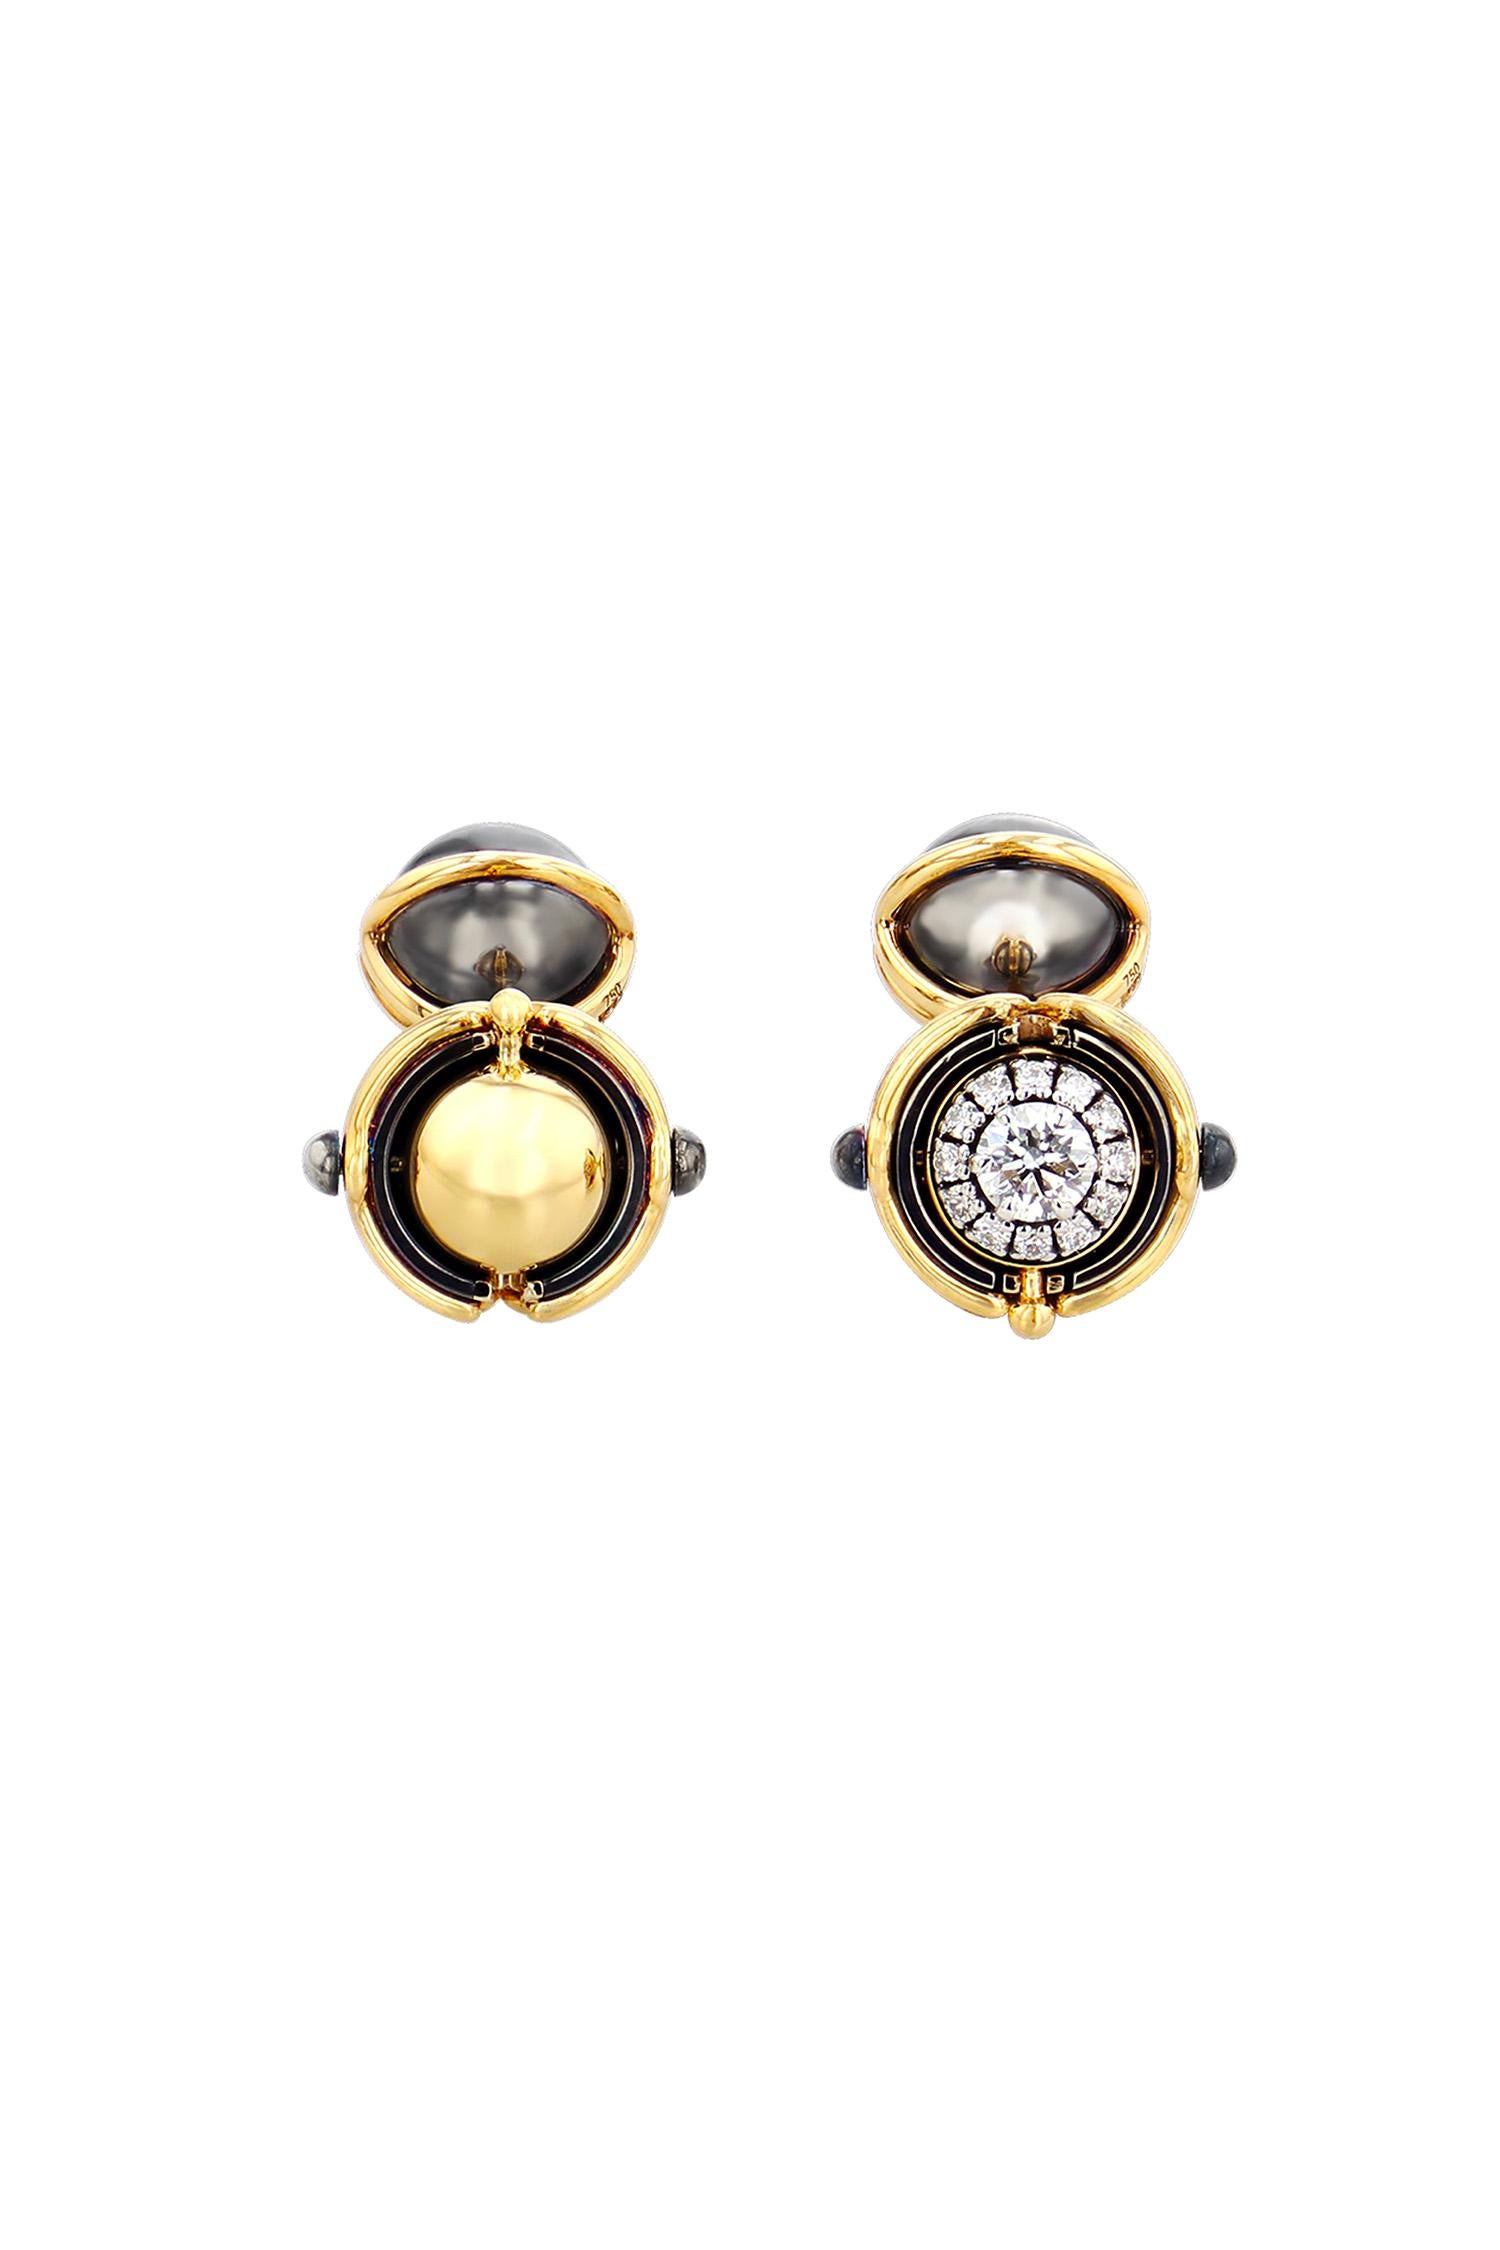 Gold and distressed silver cufflinks. Rotating spheres revealing a central diamond surrounded by diamonds.

Details: 
2 Central Diamonds: 0.46 cts, ø 4mm
24 Diamonds: 0.31 cts
18k Yellow Gold: 7.5 g
Distressed Silver: 5 g
Made in France
